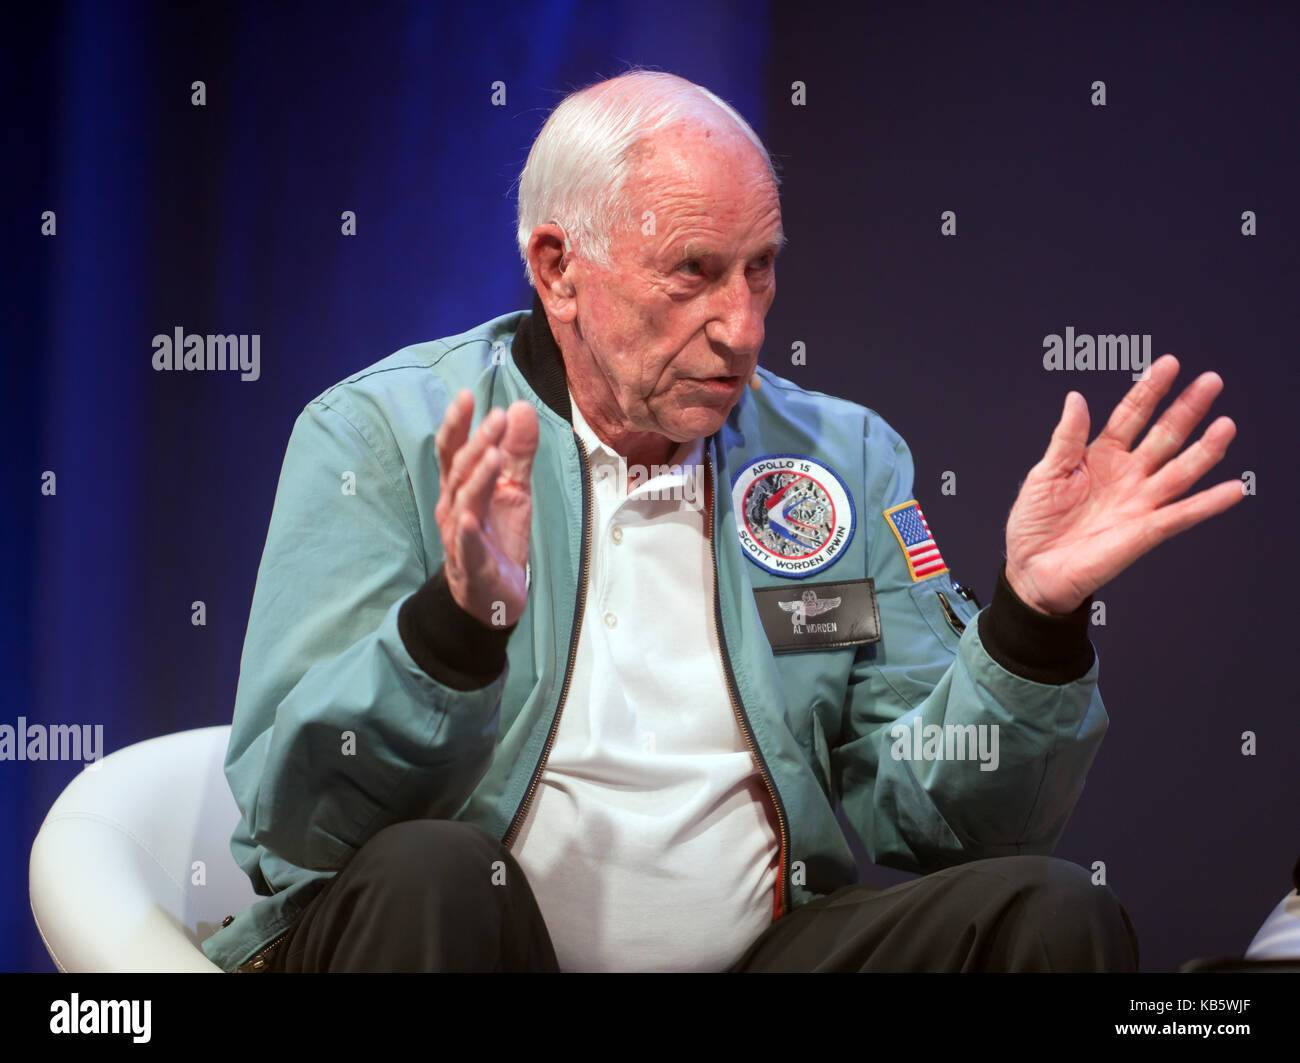 Al Worden,  American astronaut and engineer, who was the Command Module Pilot for the Apollo 15 lunar mission in 1971, sharing his experiences  on the  main stage at New Scientist Live 2017 Stock Photo